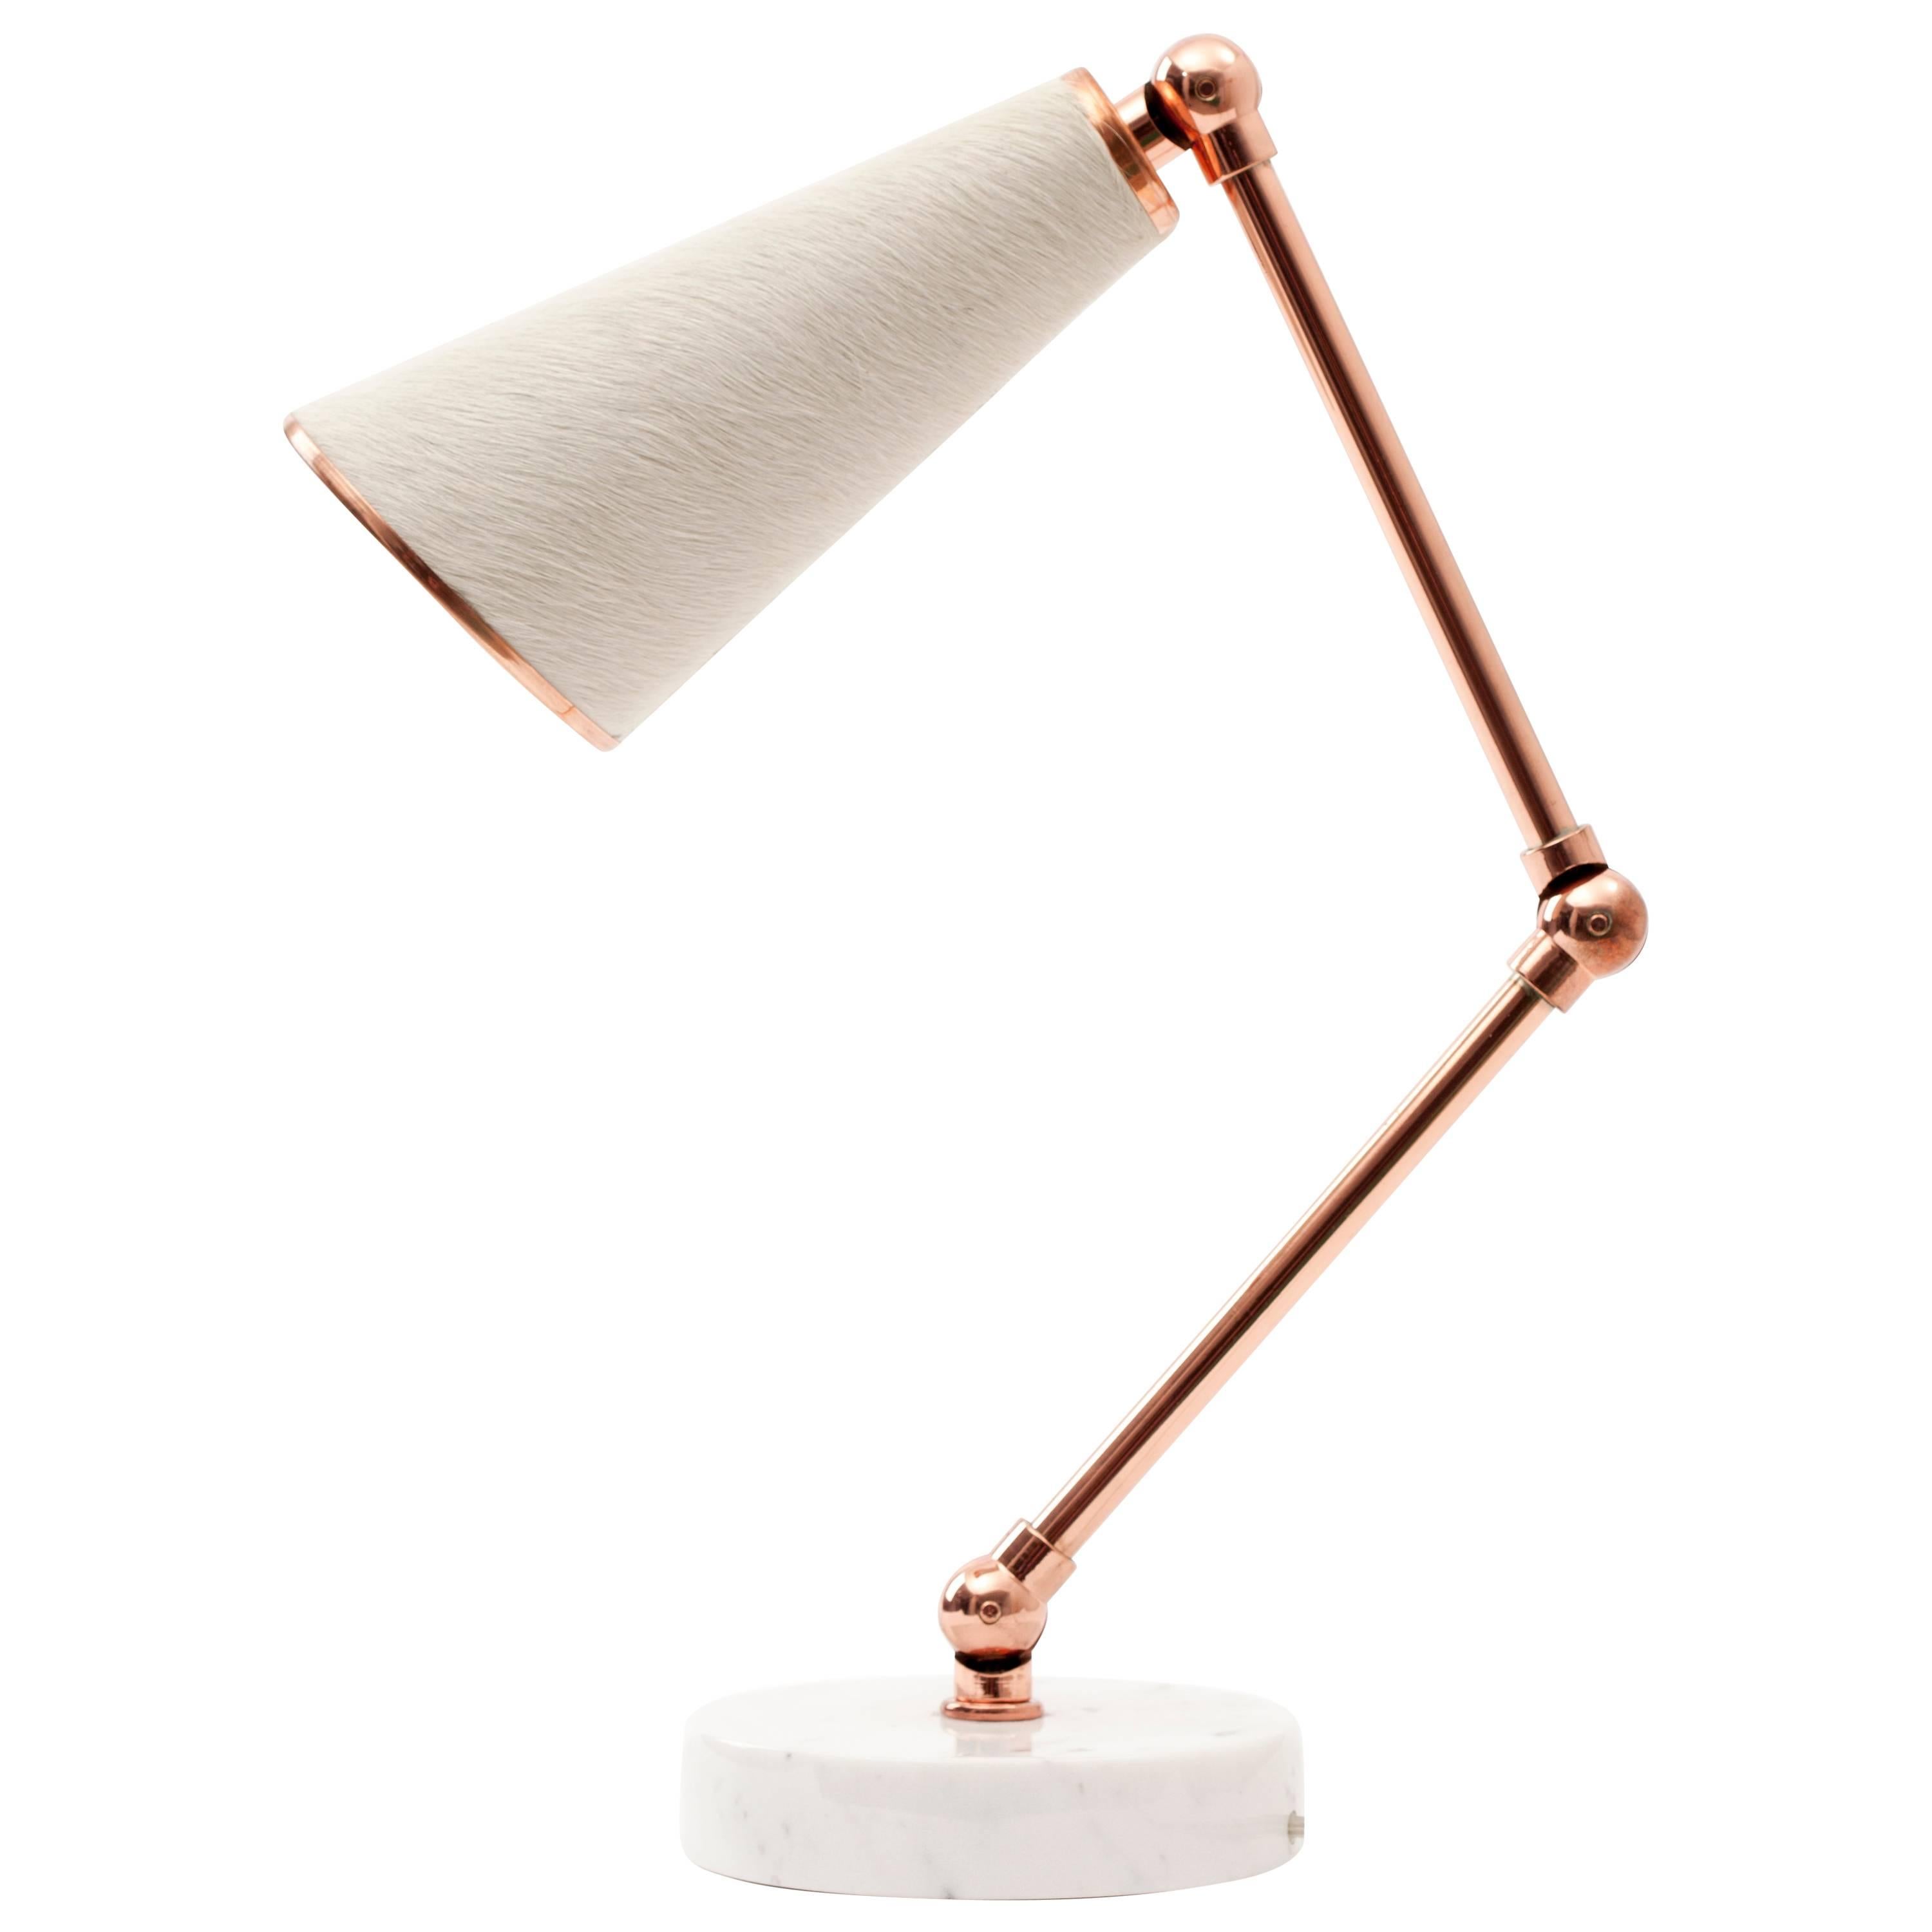 21st Century Lanterna White Cowhide Table Lamp in Copper and Carrara Marble